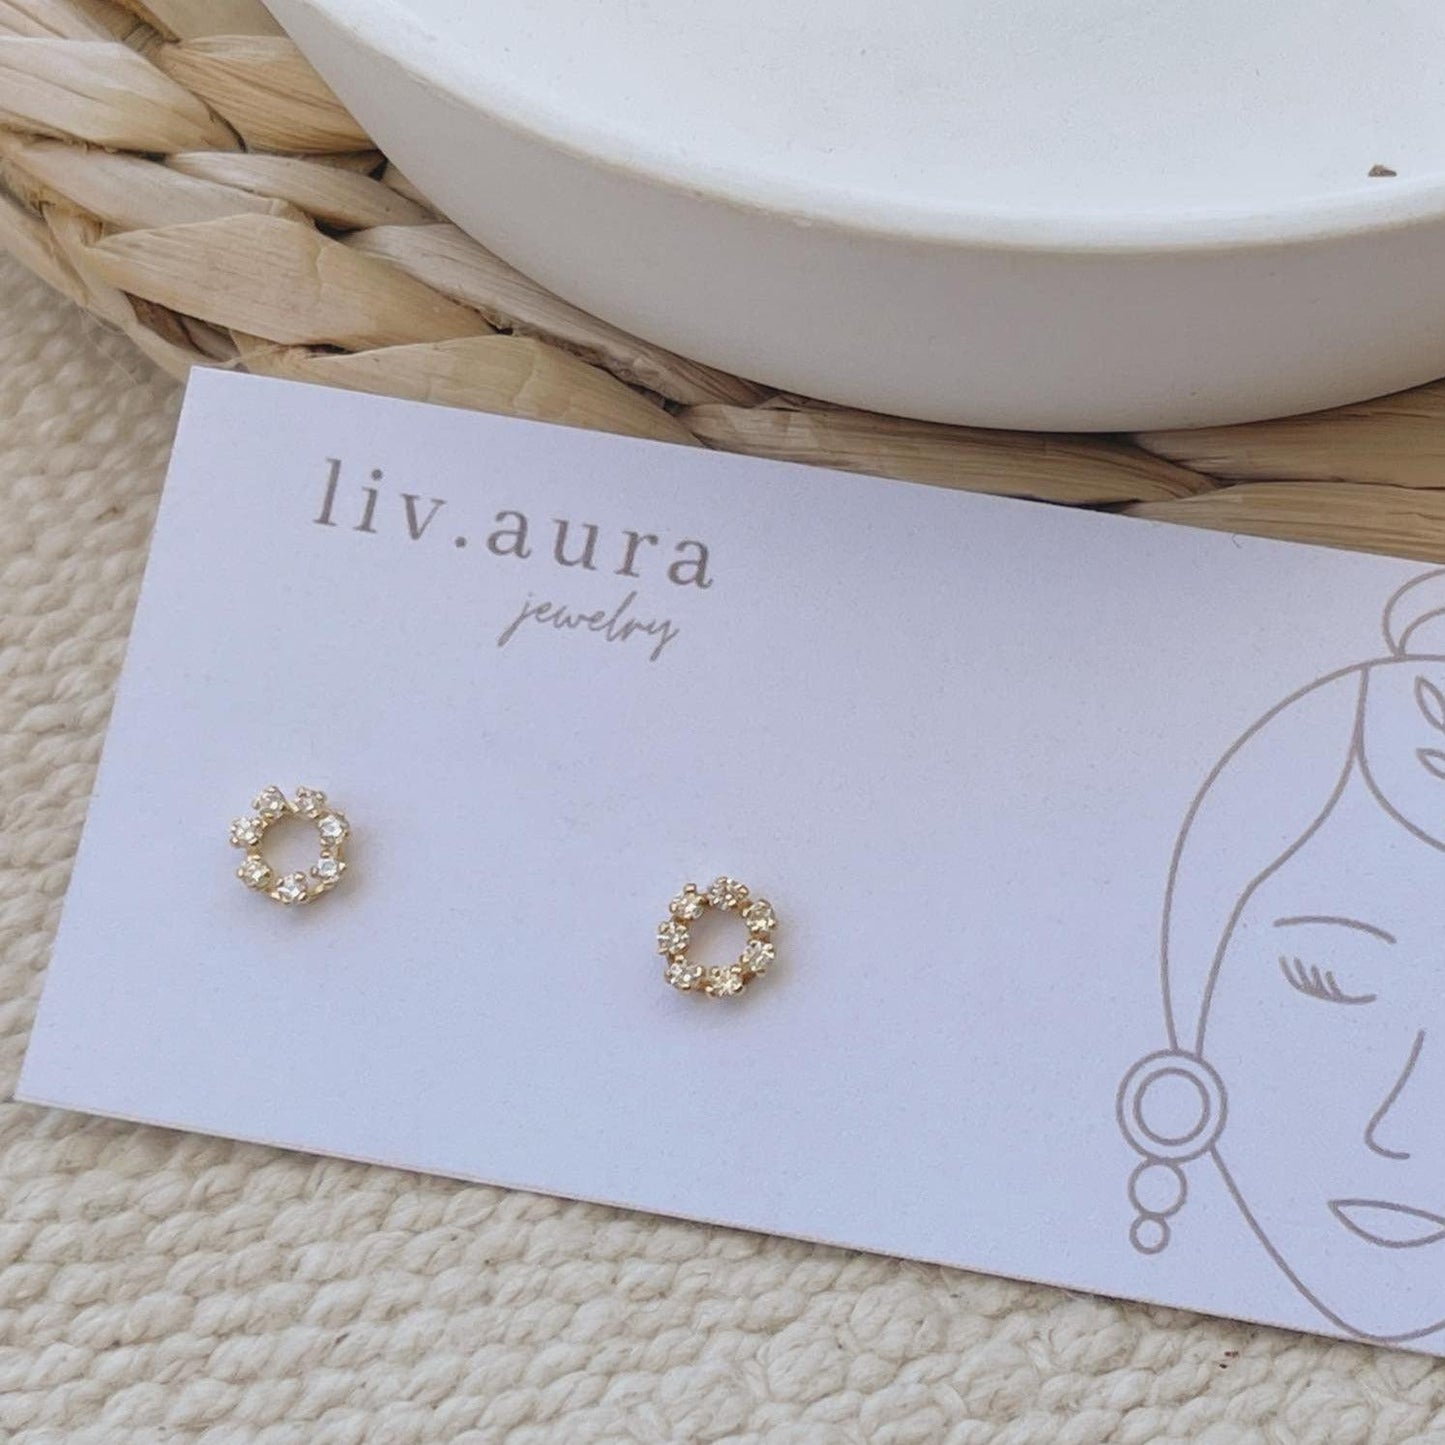 If you're looking for a simplistic and classy look, you'll love these open circle stud earrings. These gold circle earrings are the perfect pair for any outfit and make a great gift for your friends and family. Wear them with your hair up in a bun to highlight their design, or wear them hanging from your lobes!